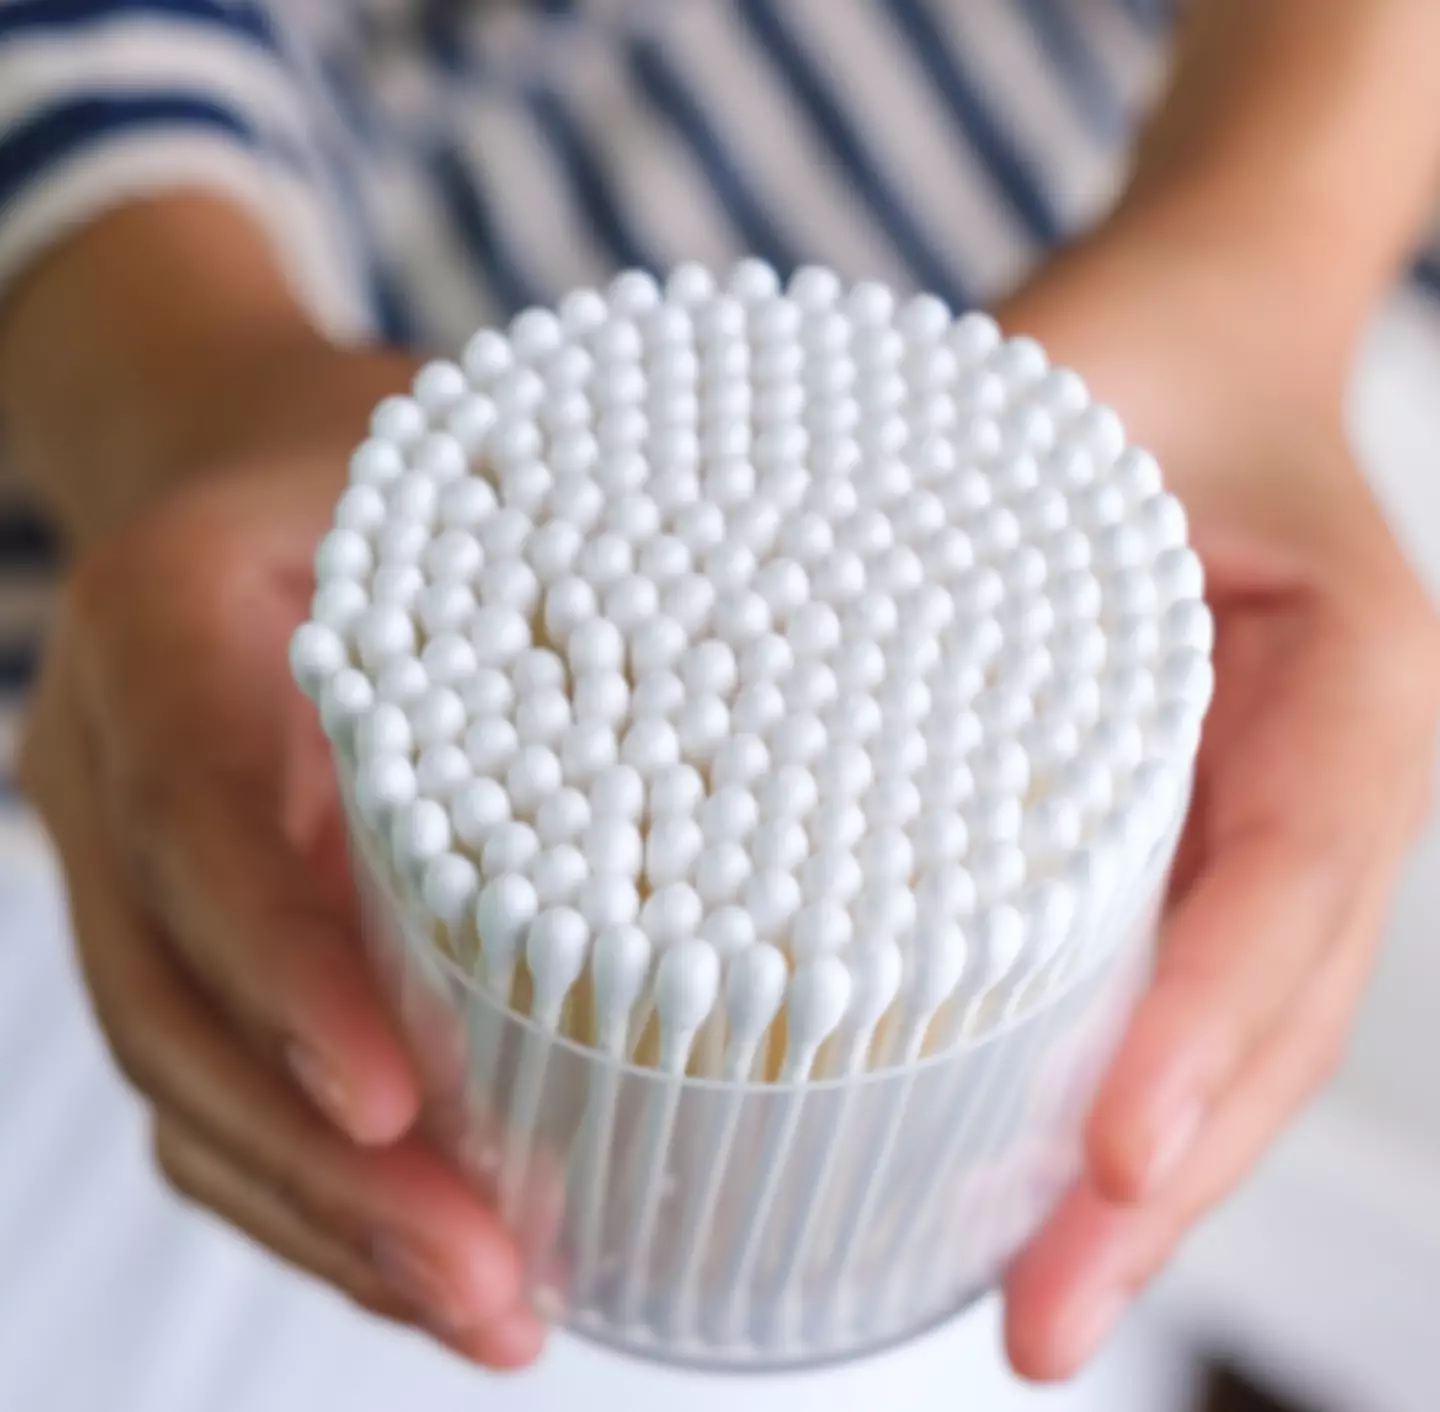 It is recommended that you don't use cotton swabs when cleaning your ears.